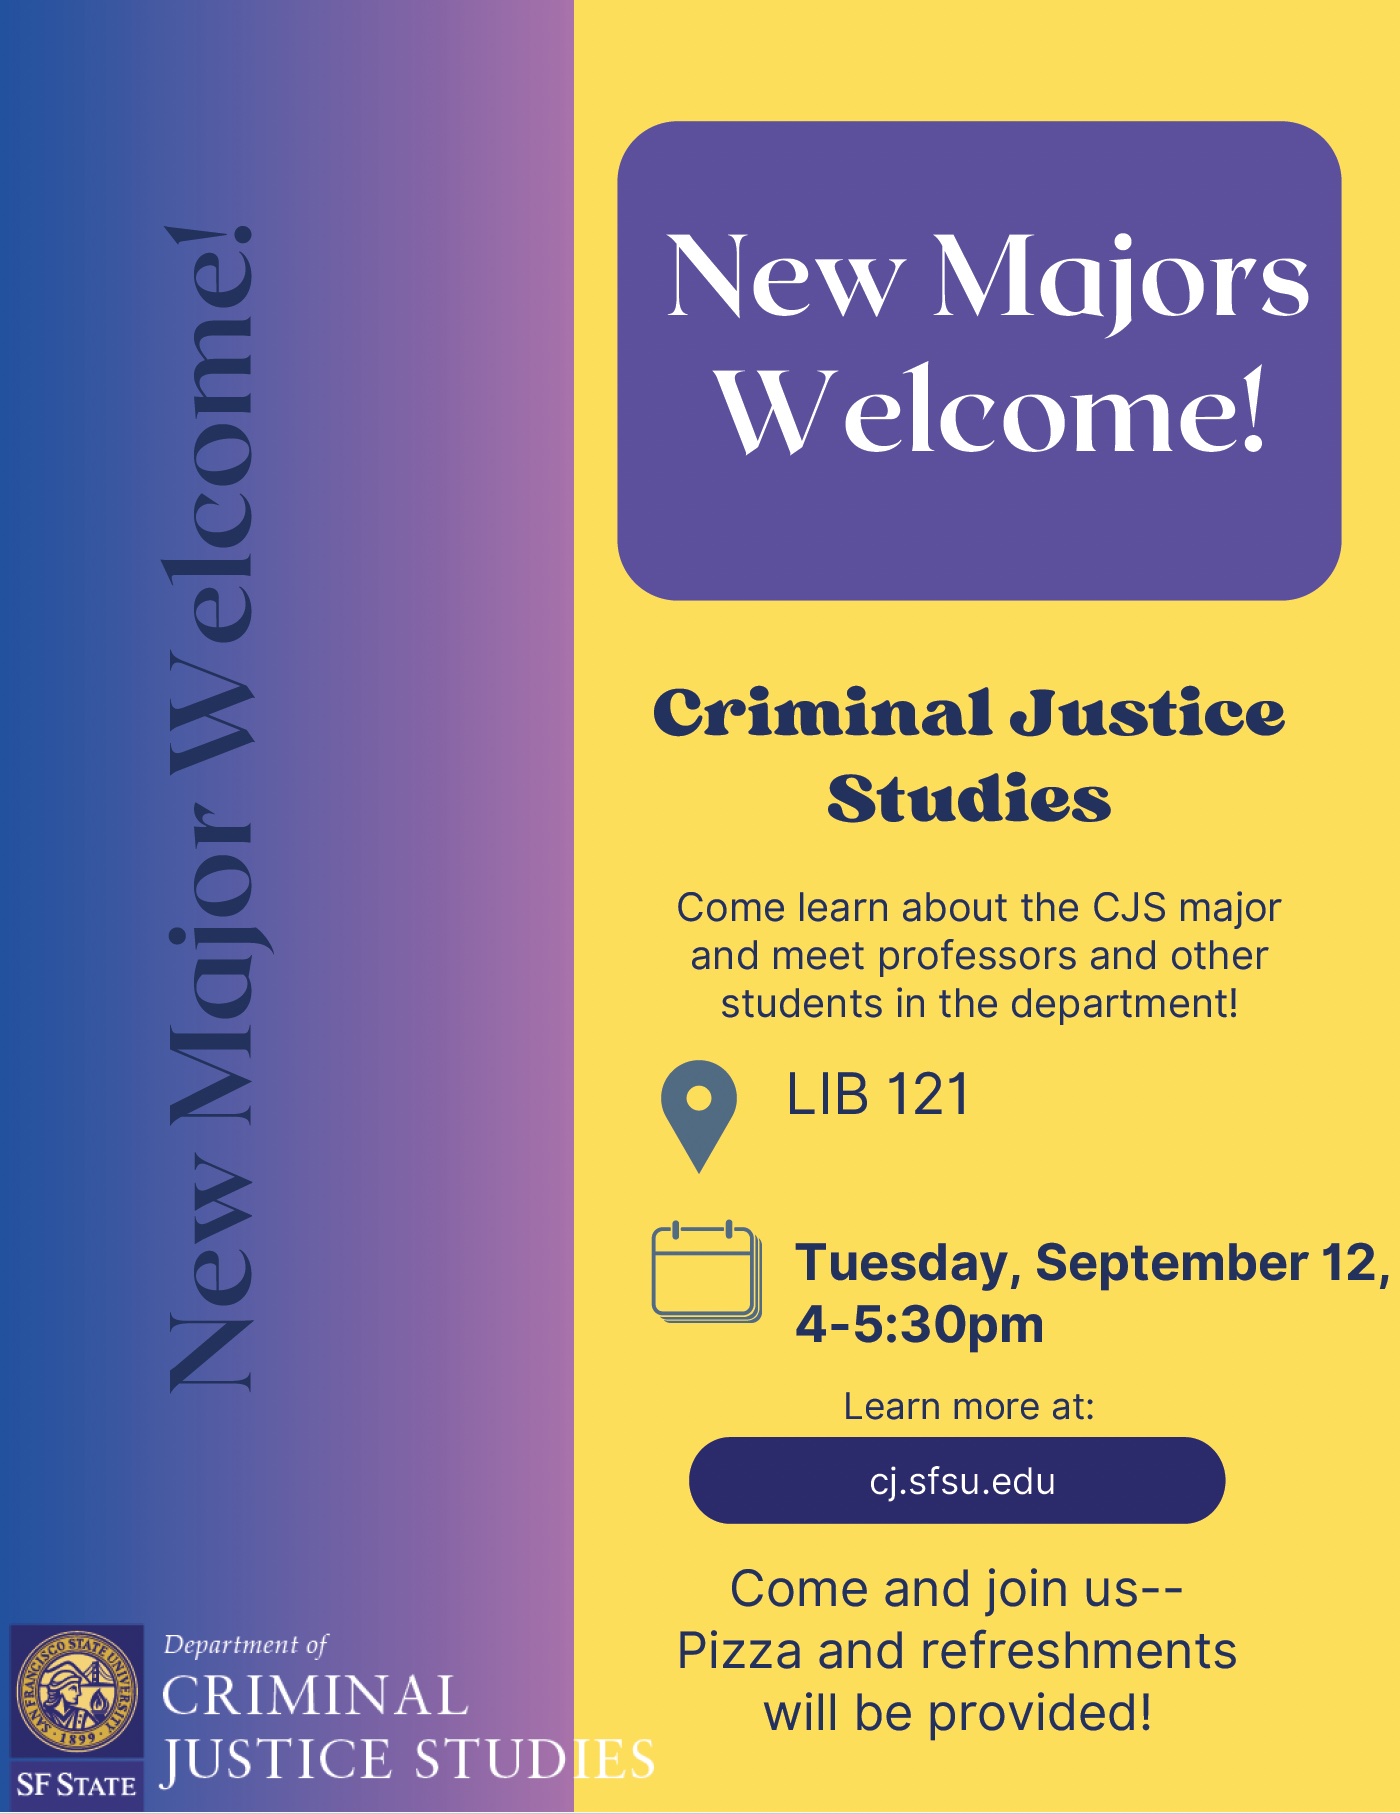 New majors welcome